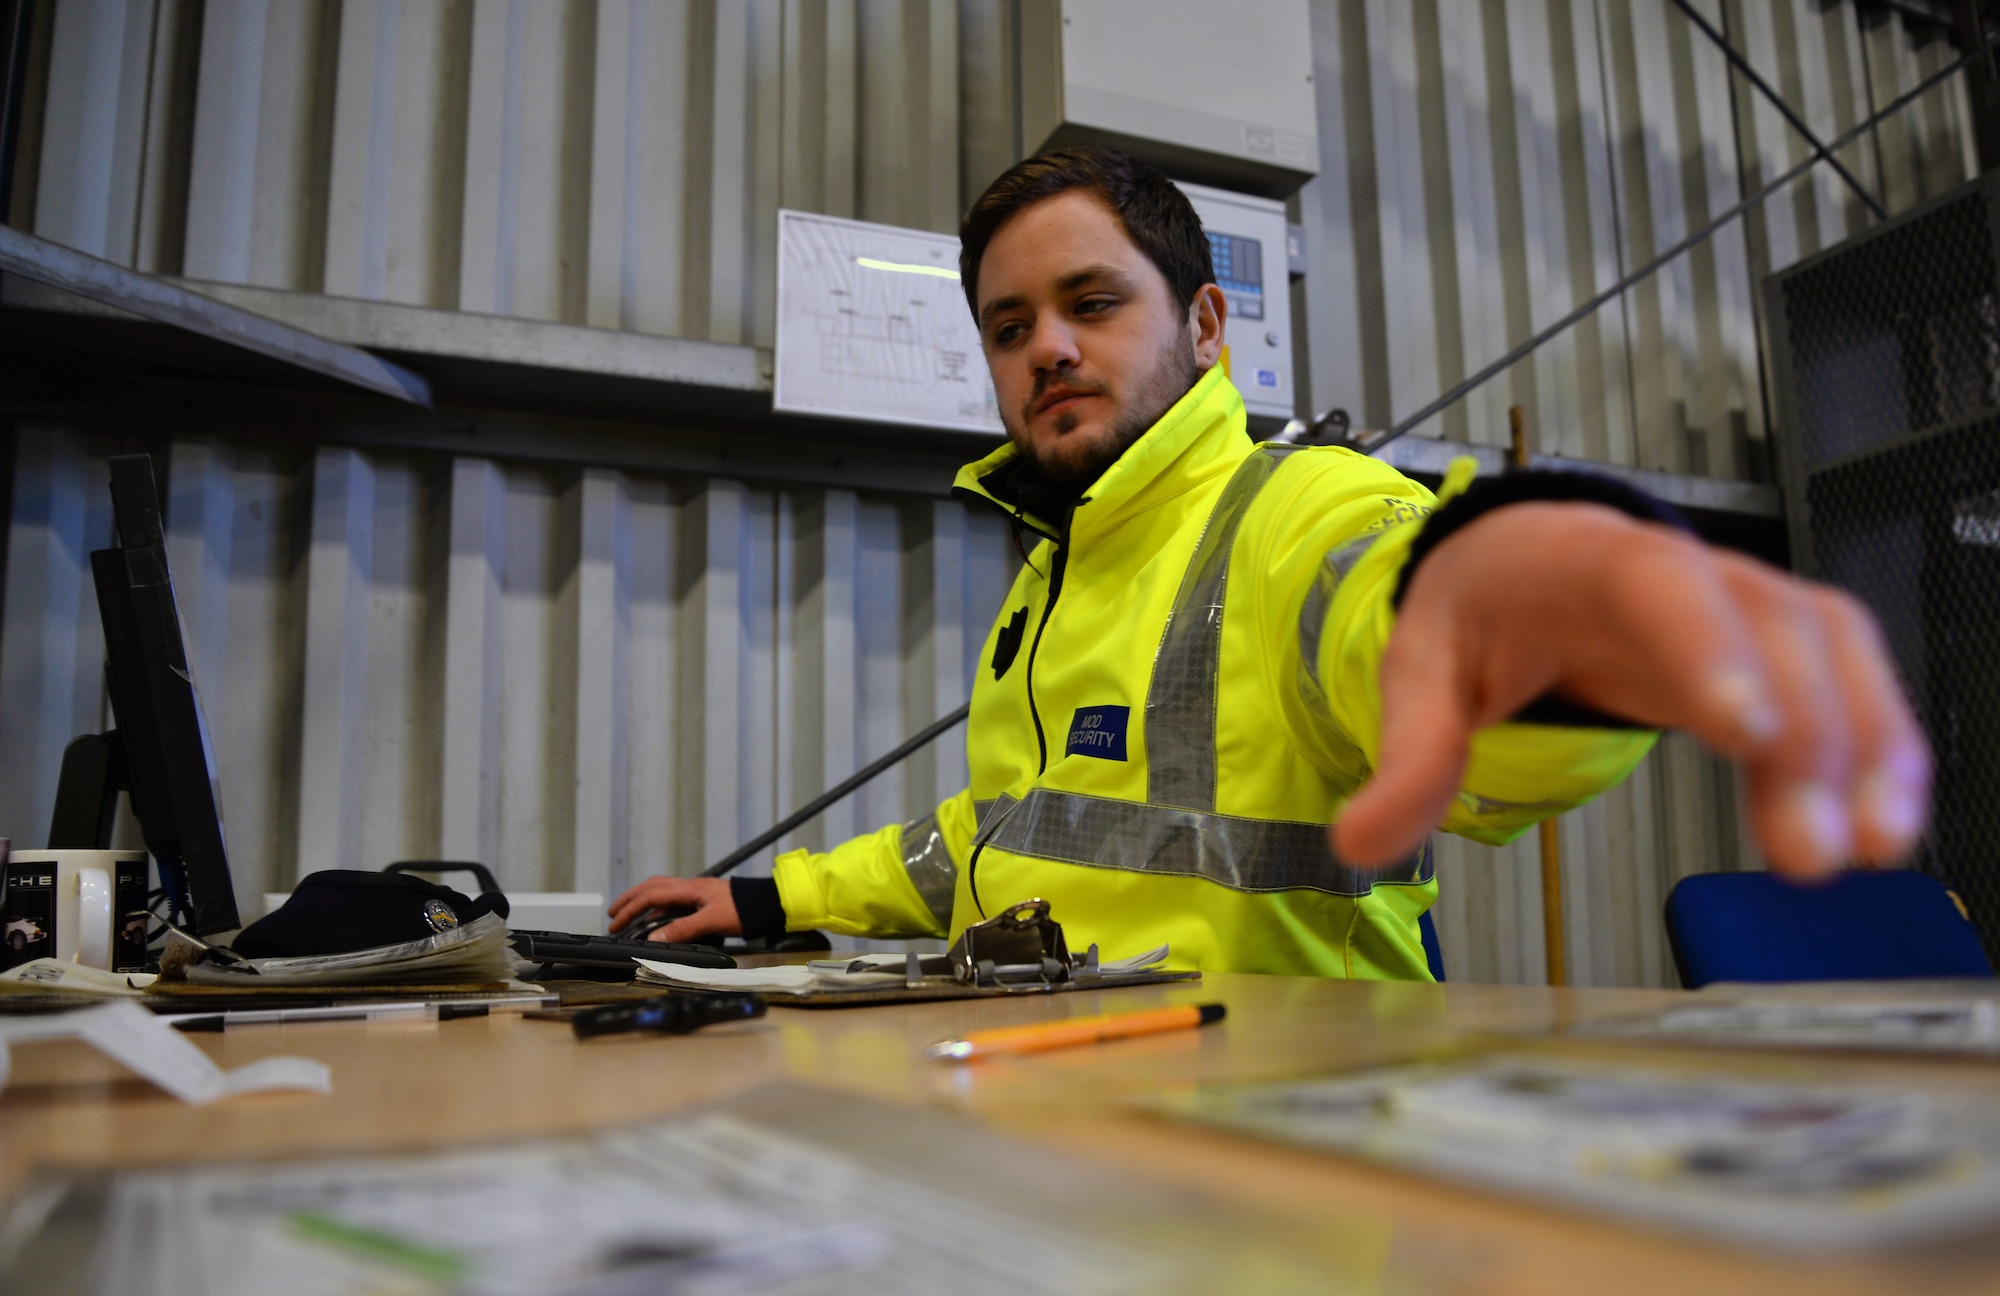 Sam Bannister, 100th Security Forces Squadron/Ministry of Defence civilian security officer, grabs a visitor’s photo ID and base pass Dec. 9, 2015, at the search barn on RAF Mildenhall, England. On an average day, officers inspect anywhere from 160 to 300 vehicles. Members inspect a range of cars including heavy-goods vehicles, contracting staff and visitors to the base. (U.S. Air Force photo by Senior Airman Christine Halan/Released)